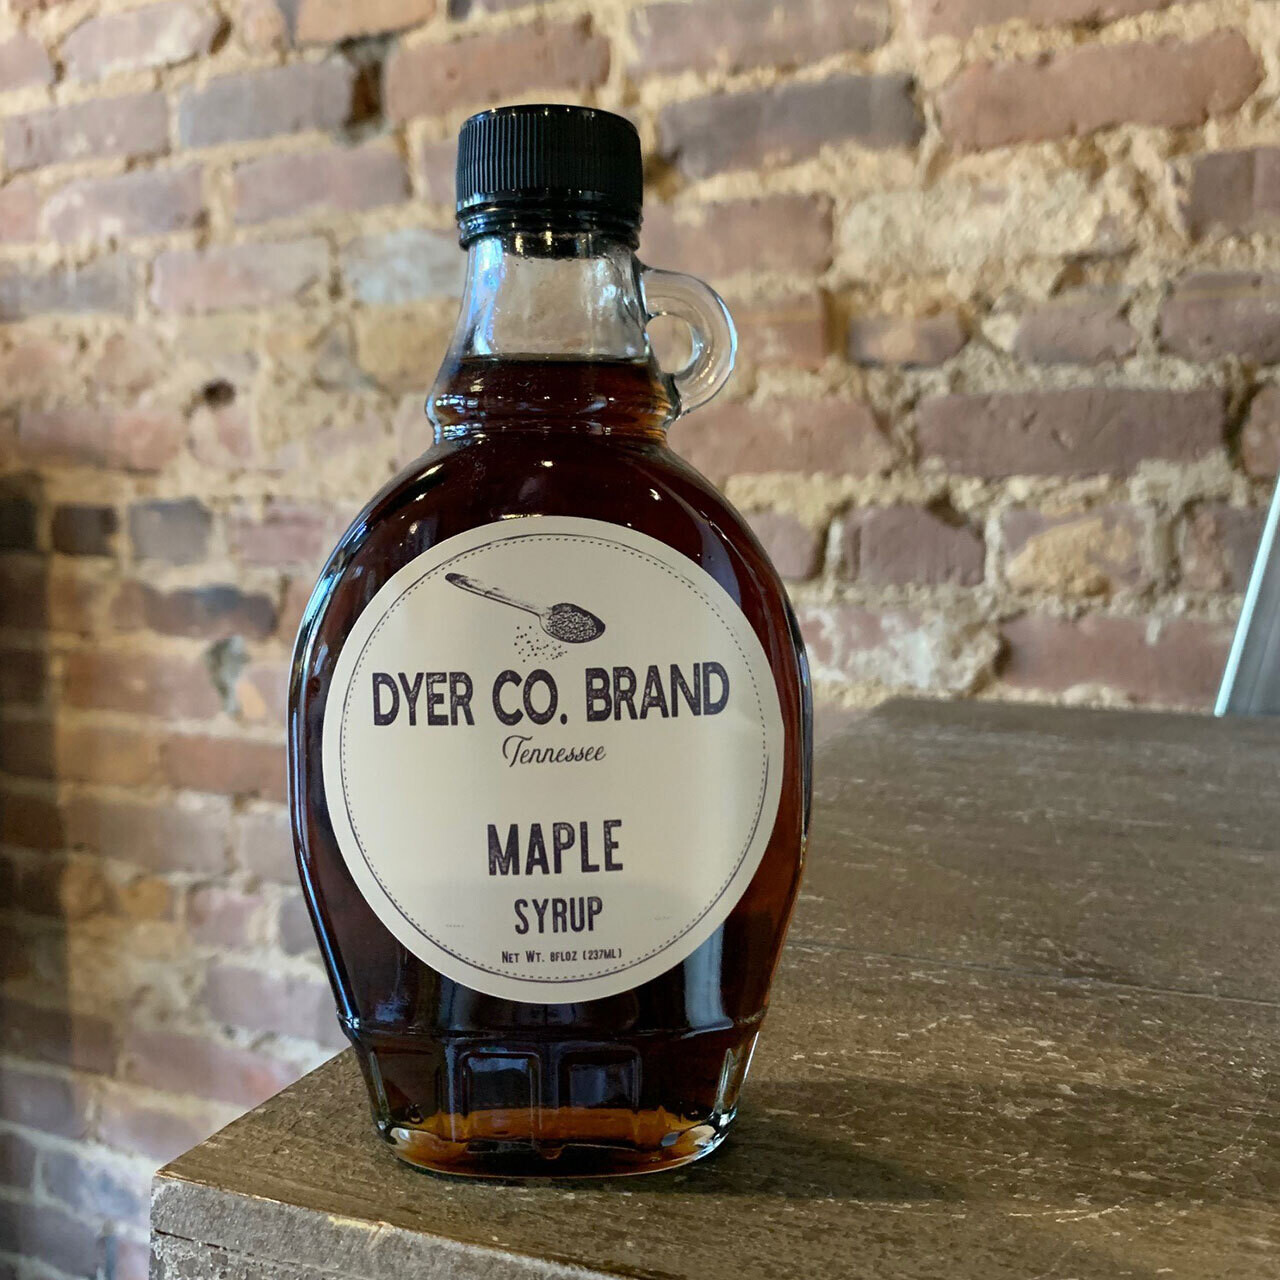 Dyer Co Brand Maple Syrup